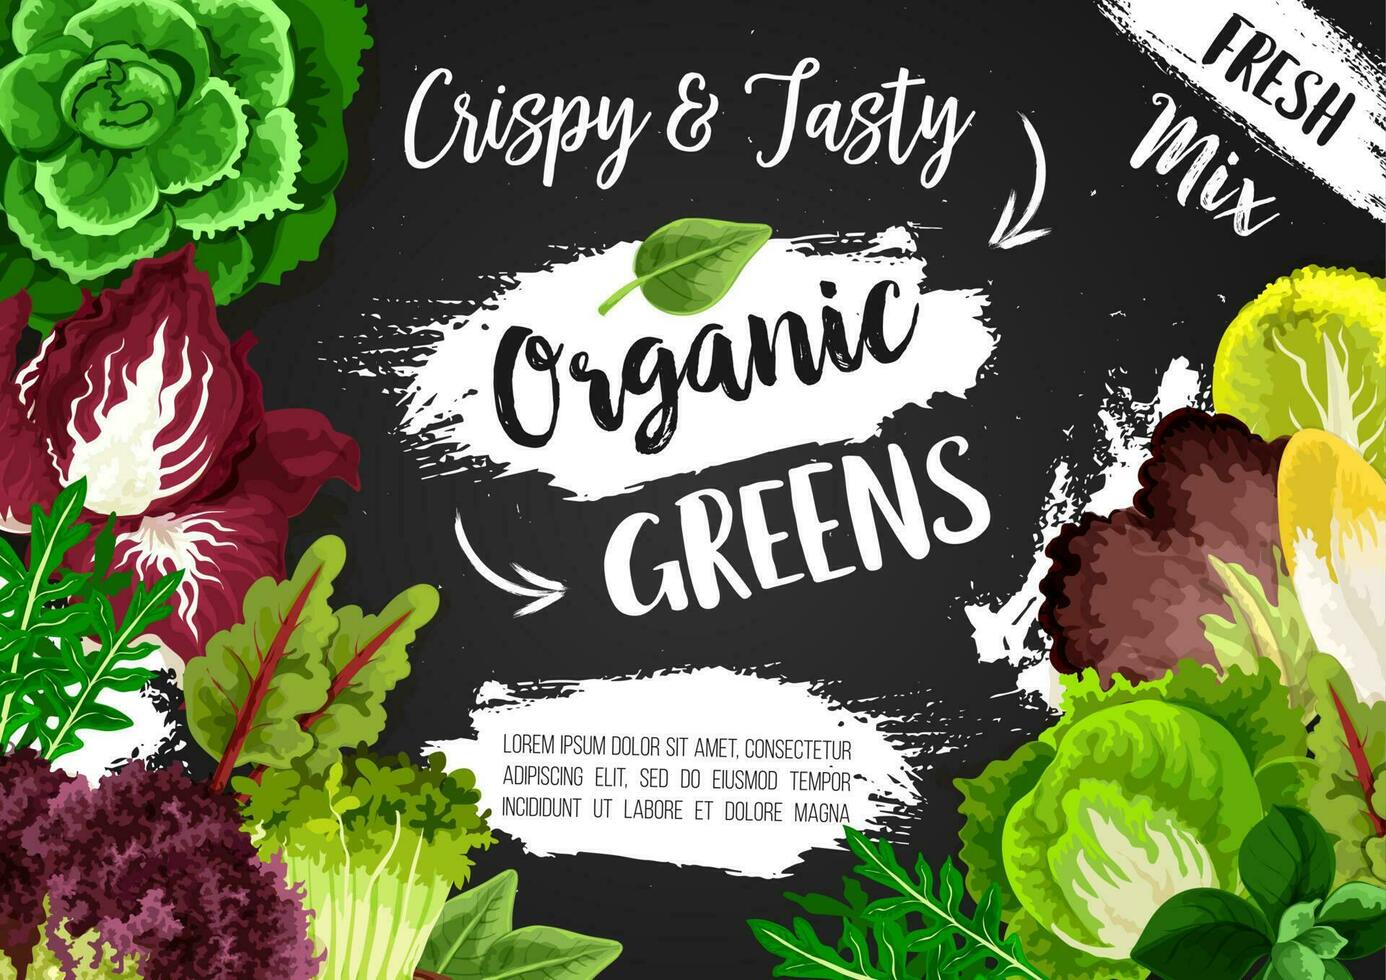 Vegetable green salads and veggie lettuces vector